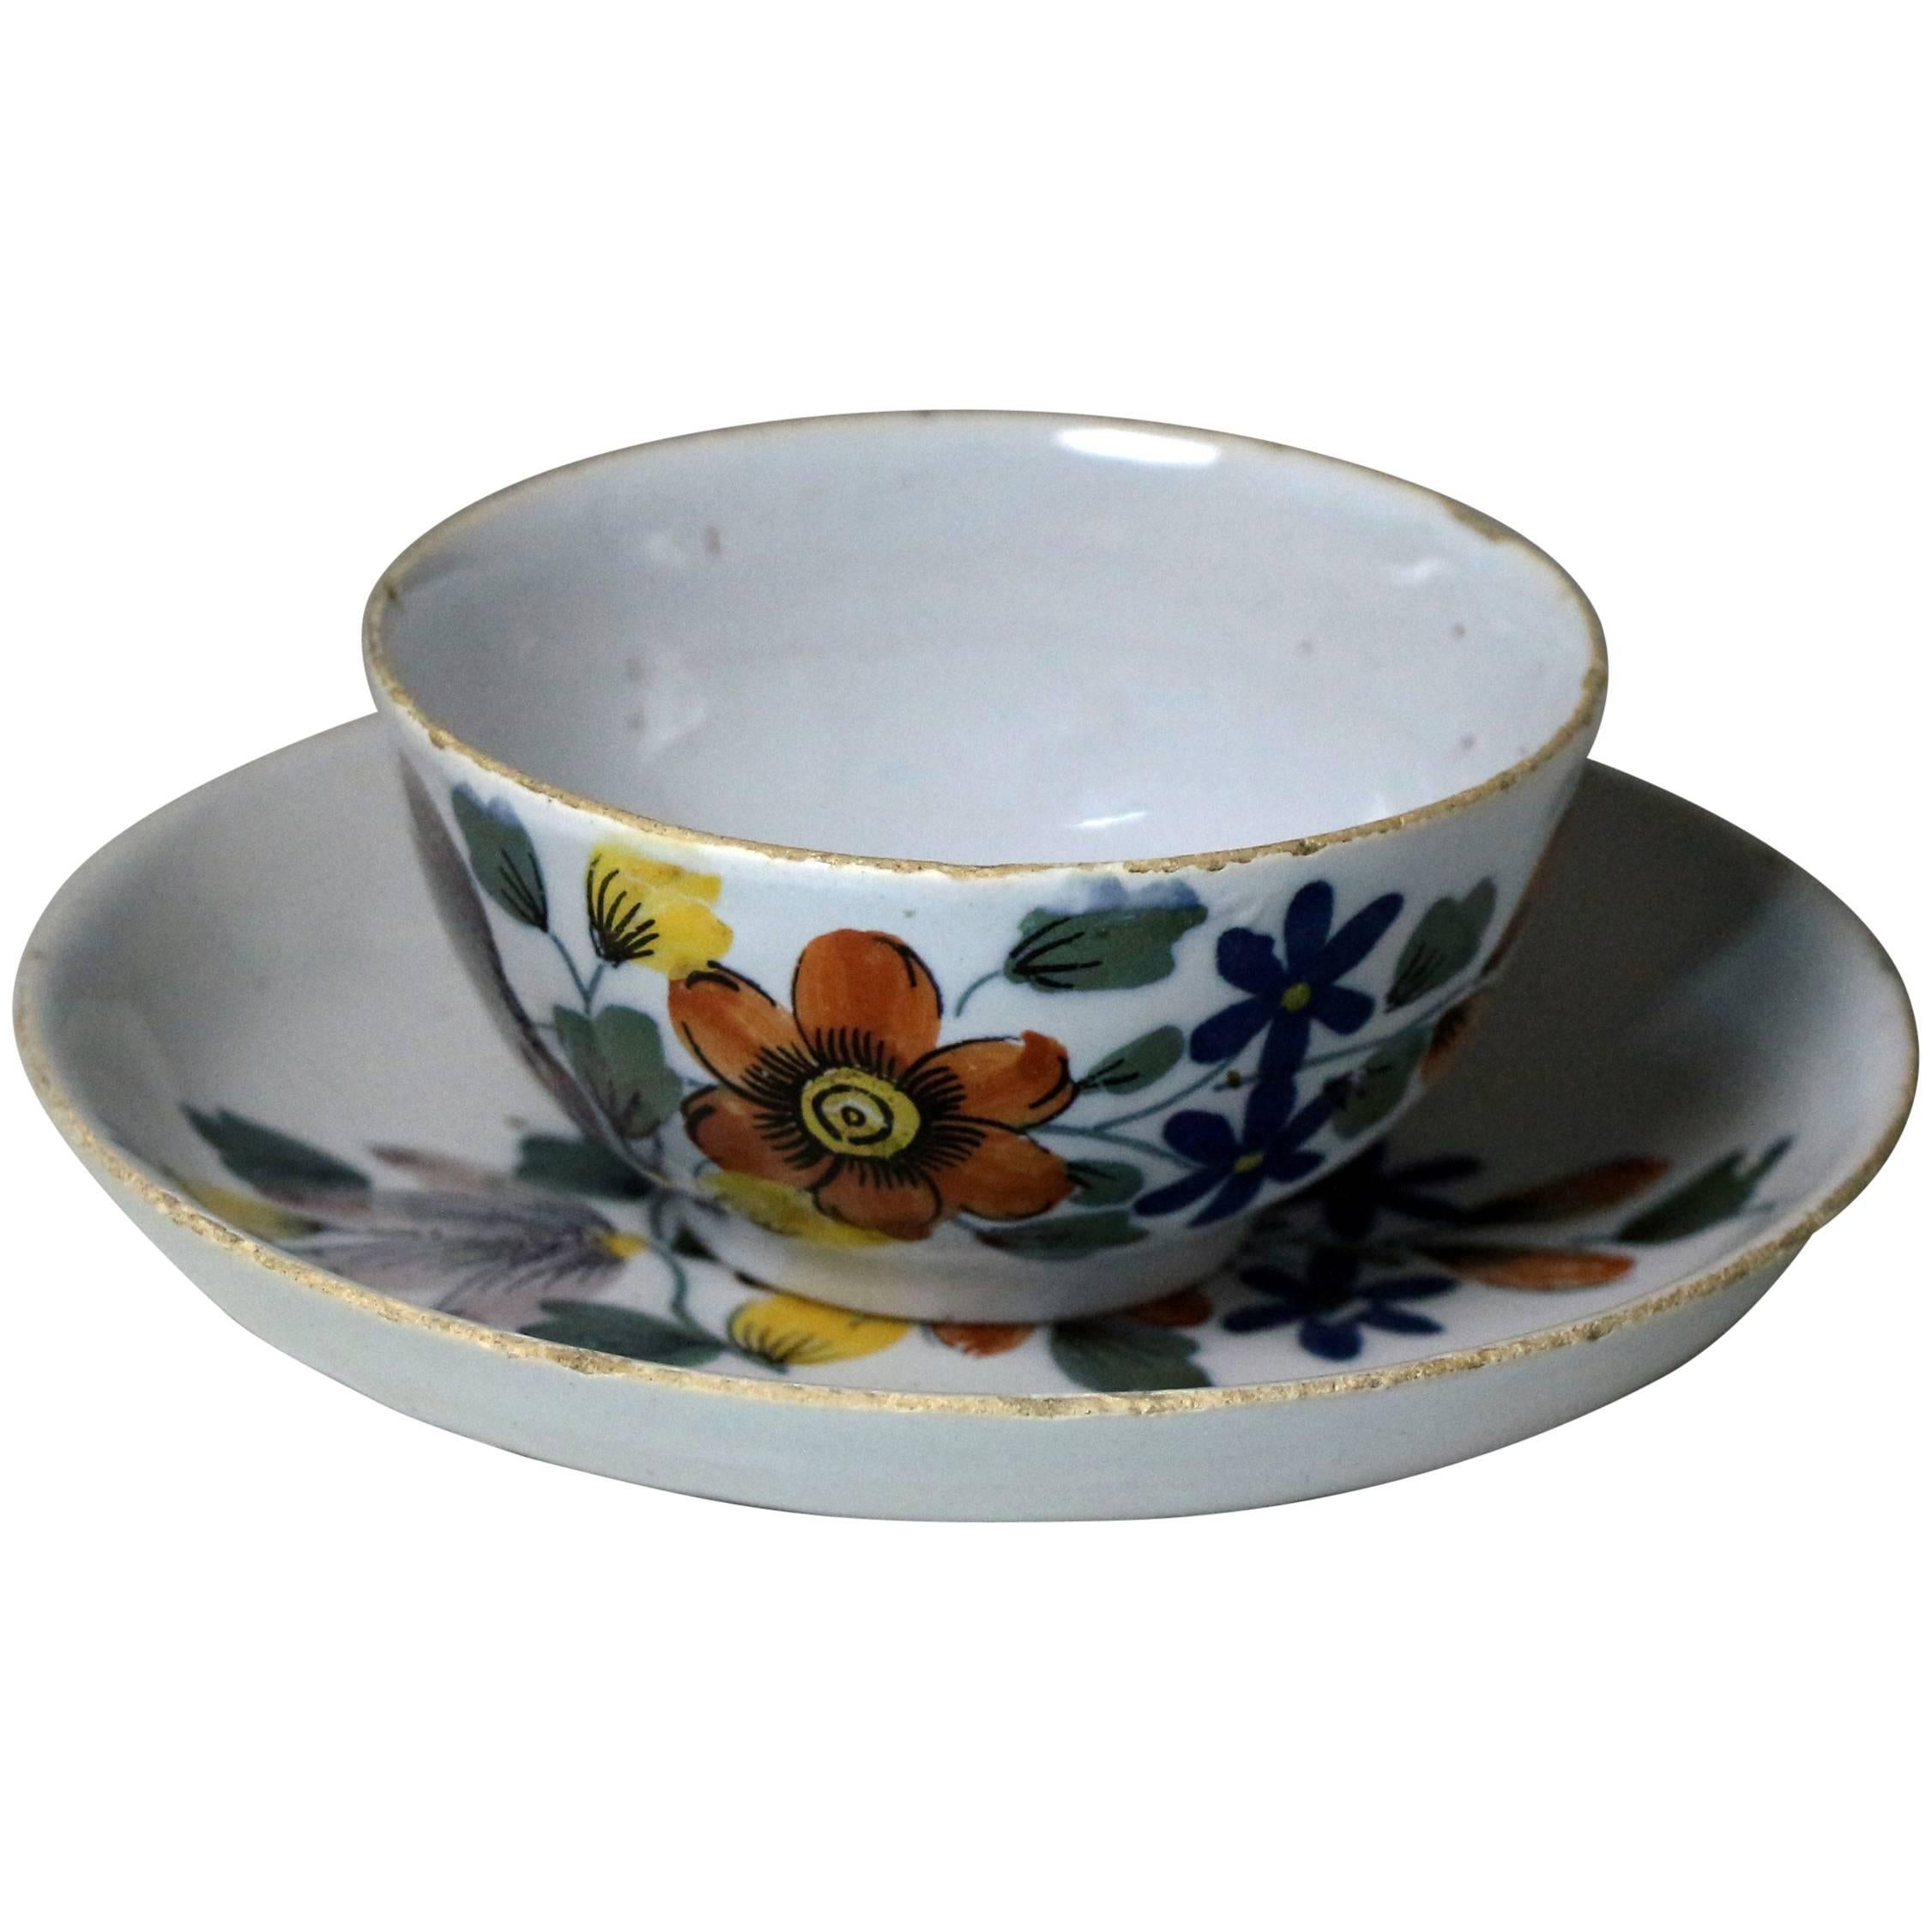 Delftware Pottery Polychrome Decorated Tea Bowl and Saucer, Liverpool Delftworks